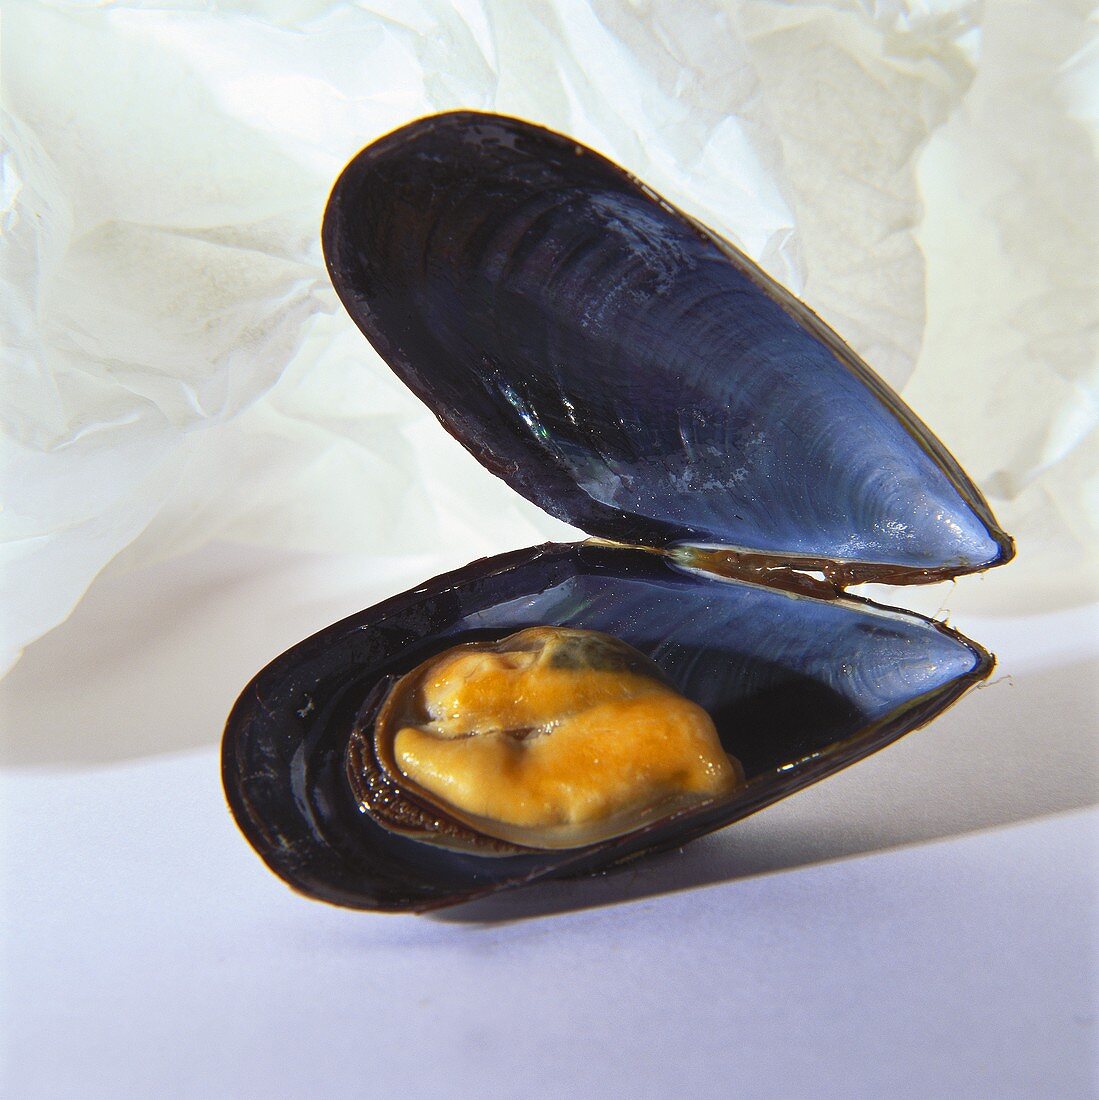 An Opened Mussel